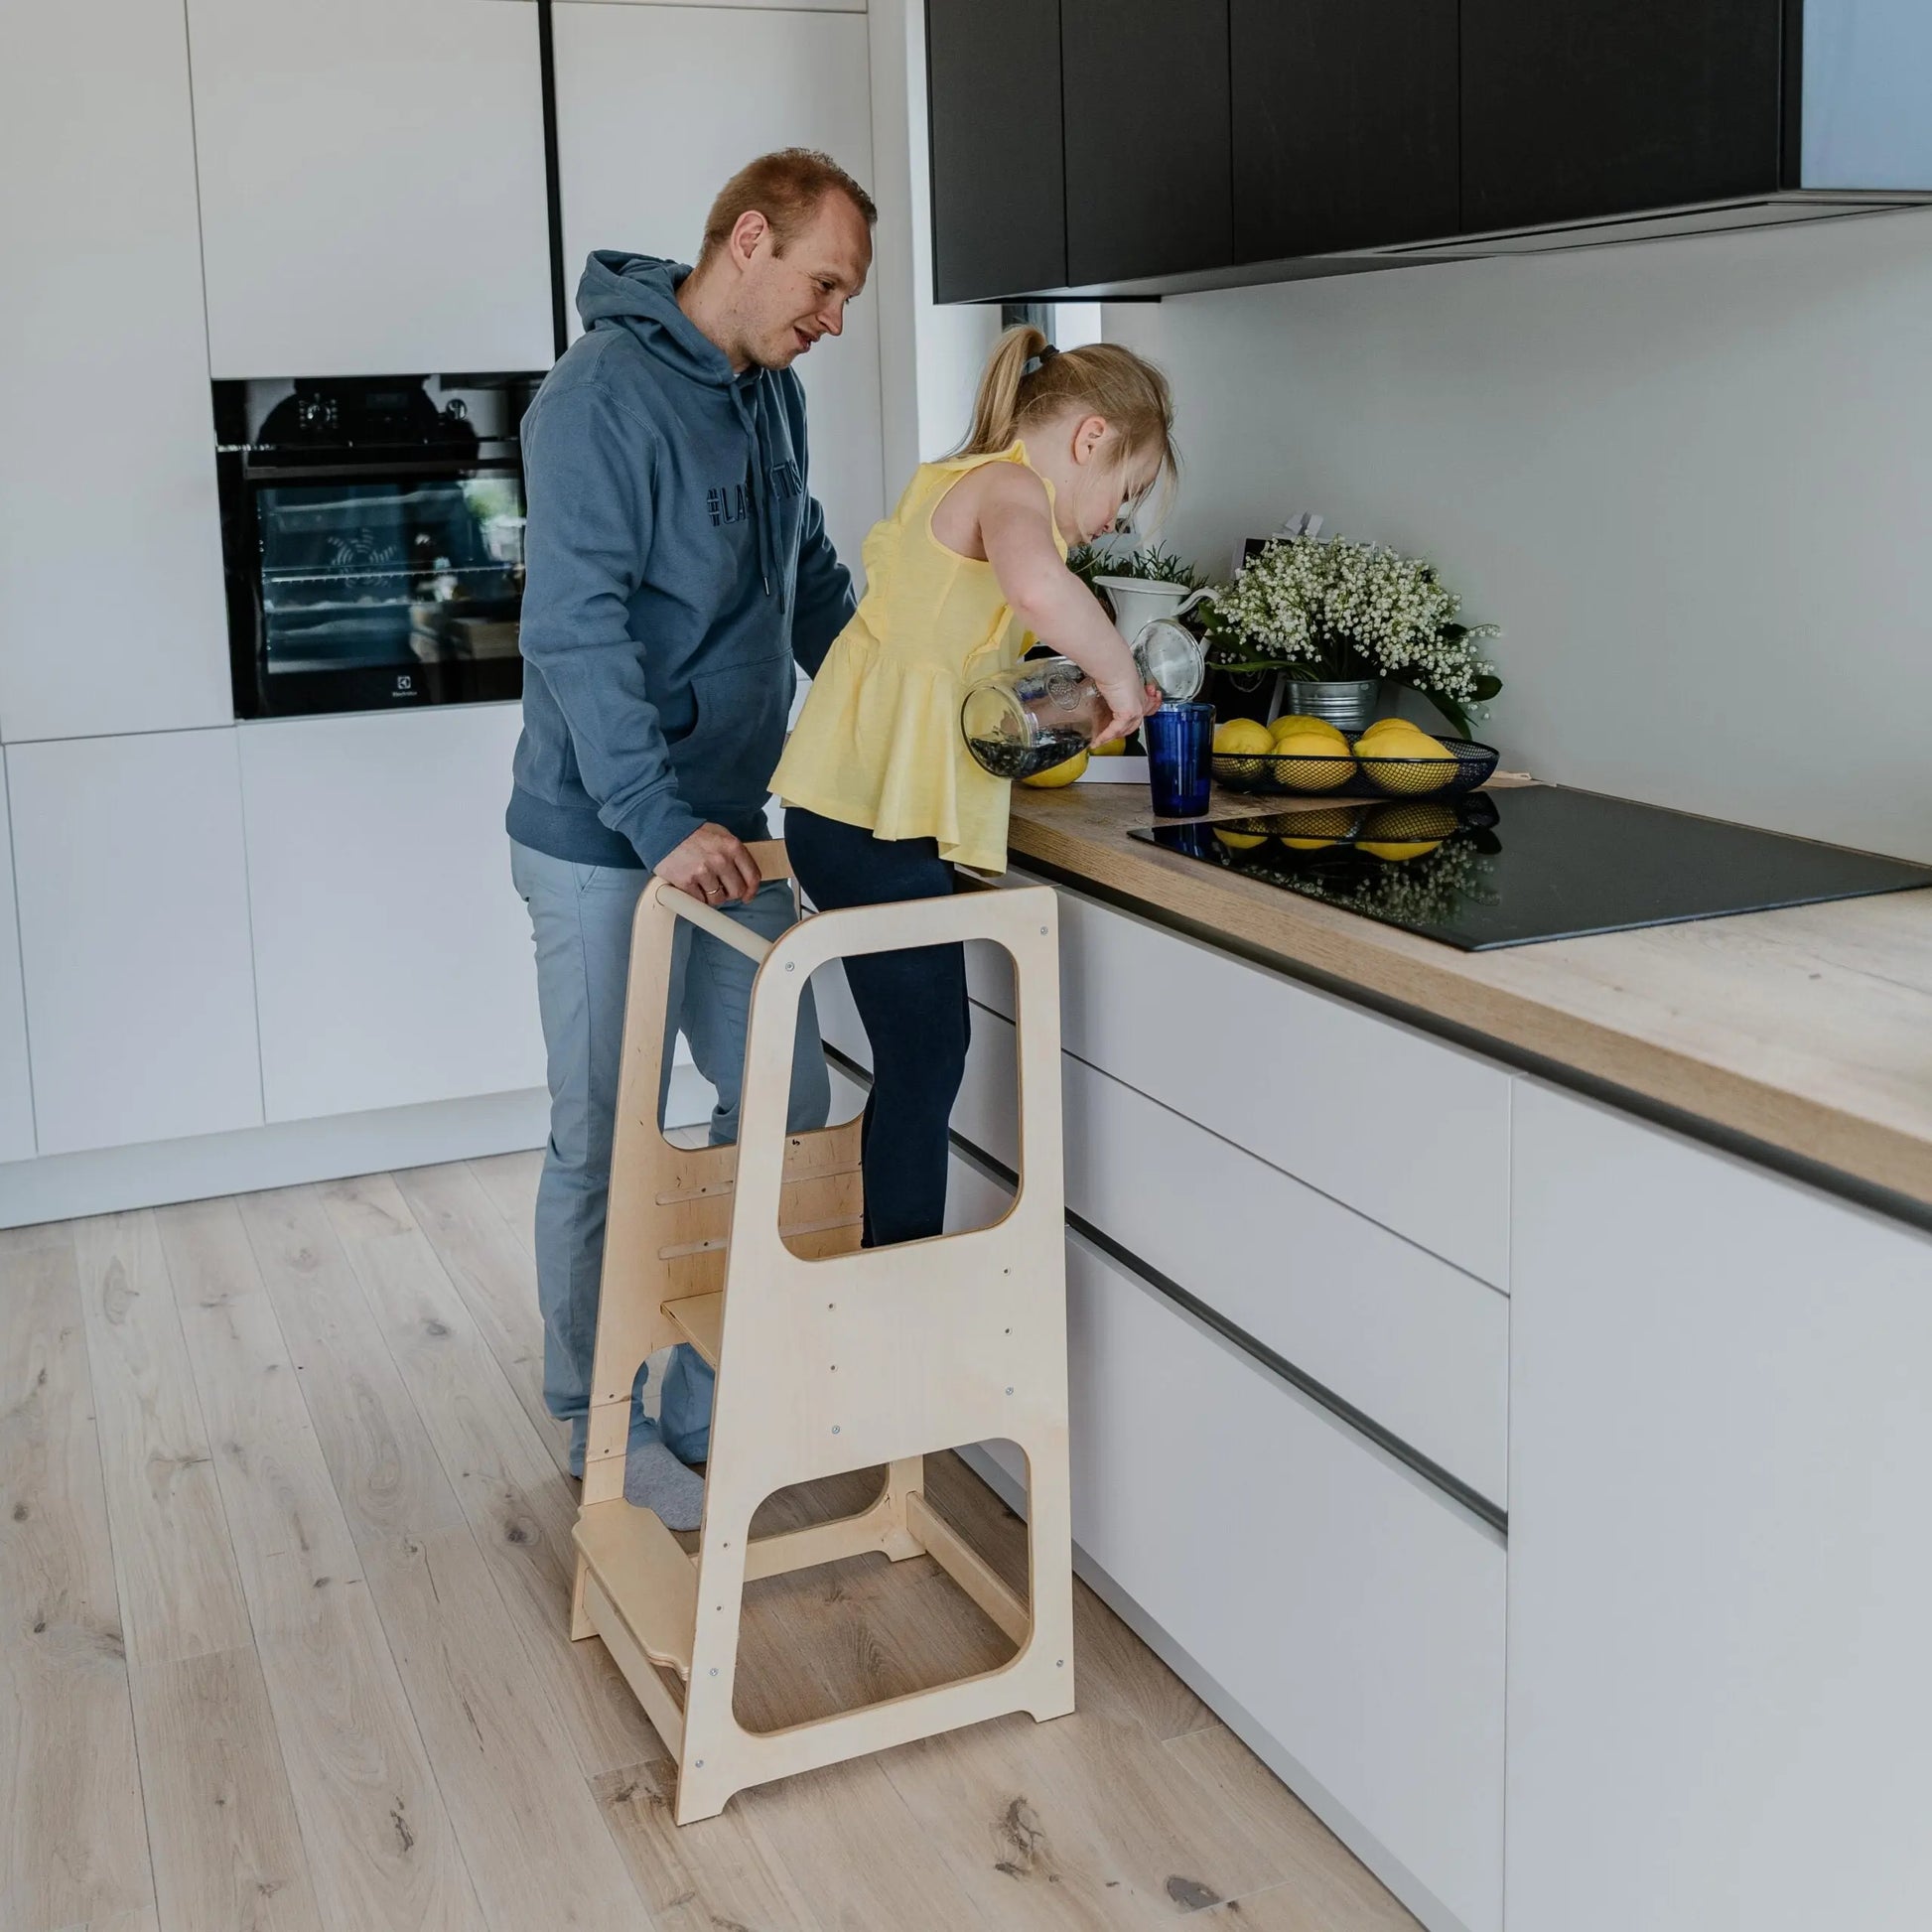 A man and child stand on a Montessori Learning Tower Step Stool in a kitchen. Height-adjustable design for kids, made from sturdy wood, encouraging independence and safe kitchen exploration.